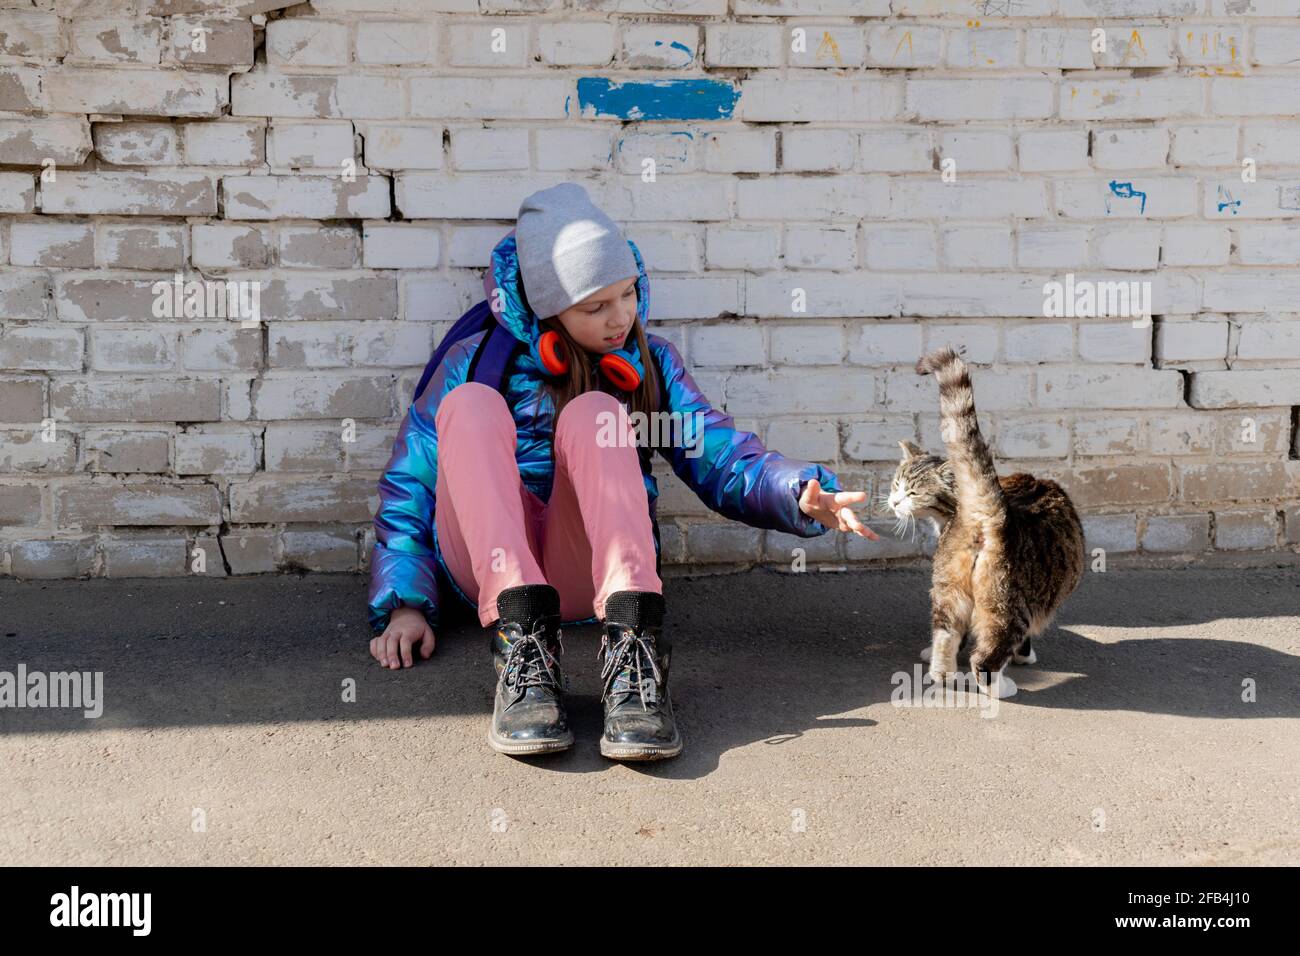 Teenage girl strokes cat the street. Concept of love for animals and environmental protection. Stock Photo